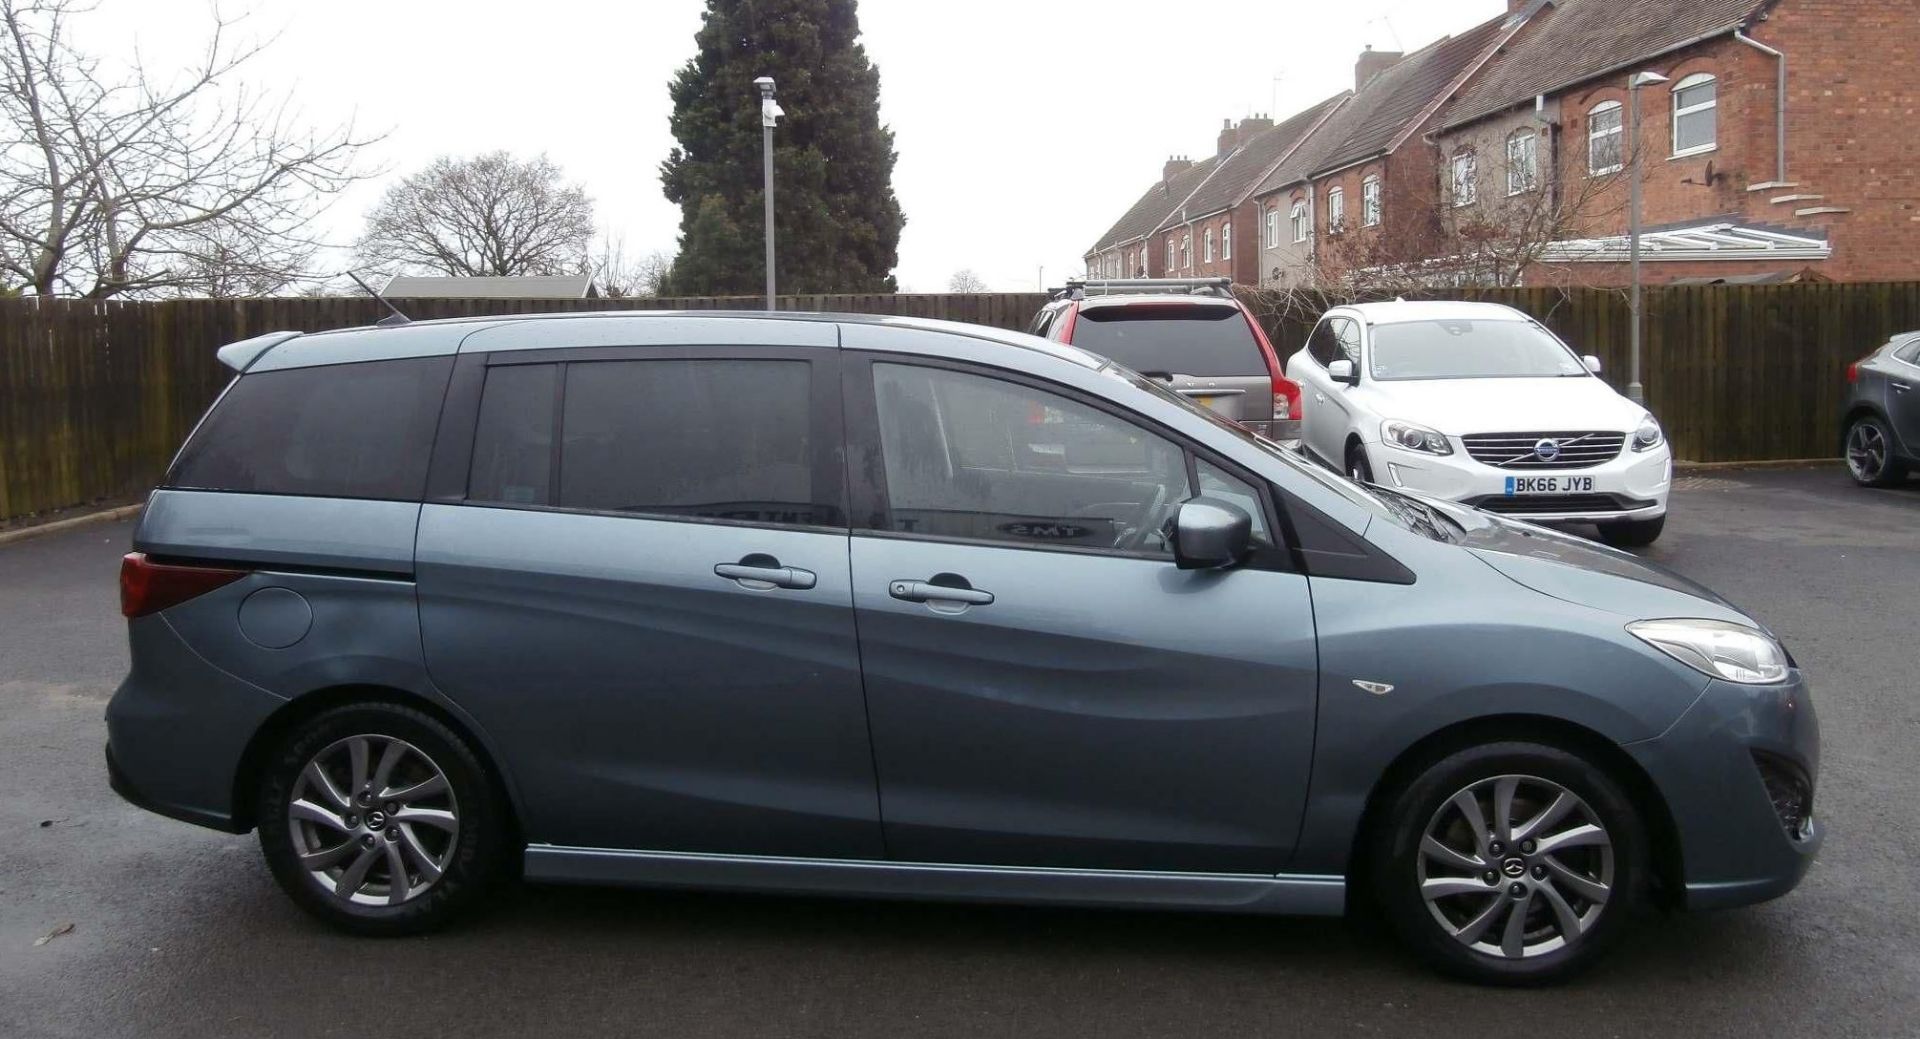 2013 Mazda 5 2.0 Venture Edition 5 Dr MPV - CL505 - NO VAT ON THE HAMMER - Location: Corby, N - Image 9 of 9